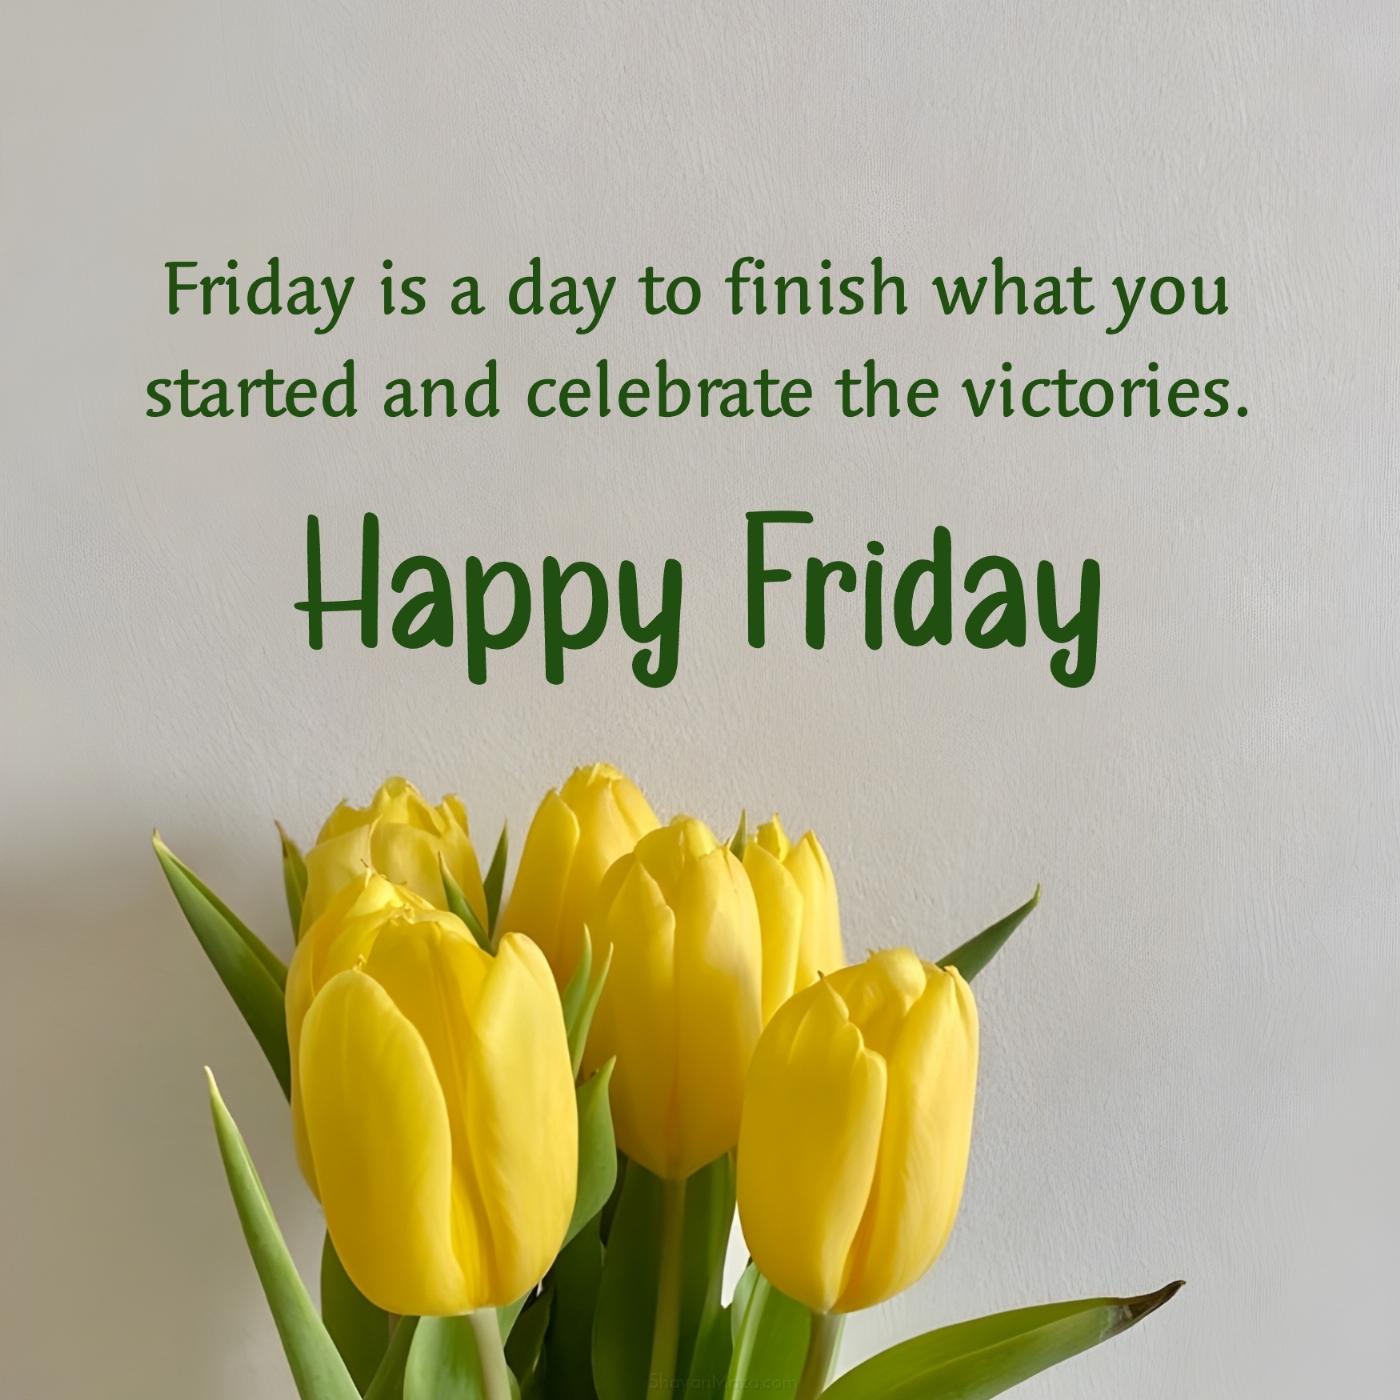 Friday is a day to finish what you started